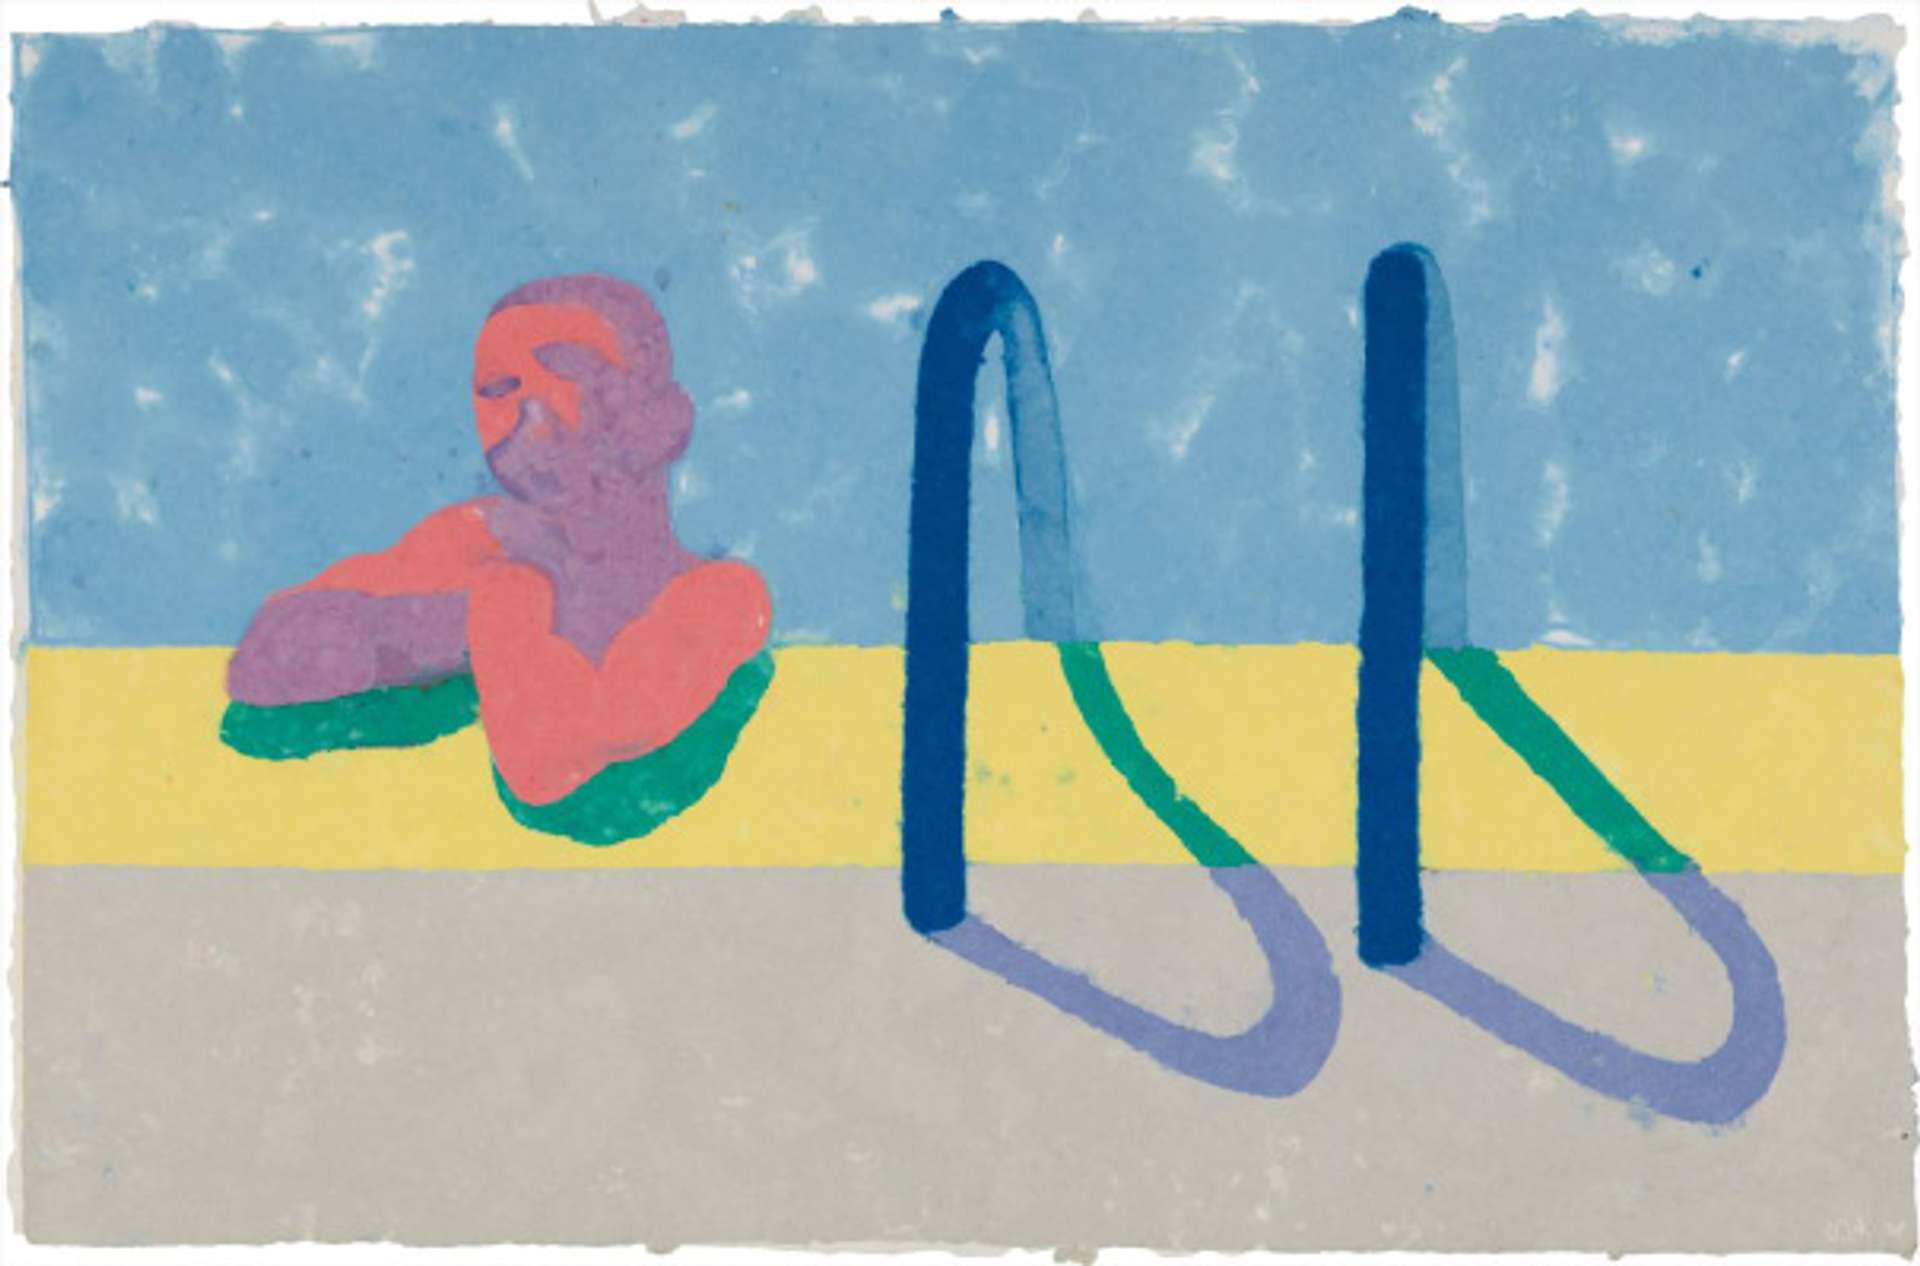 A young man appears at the left of the work, abstractly delineated in pink and purple. The figure leans agains the edge of a swimming pool, with the handle bars positioned to the right, casting a shadow into the foreground of the composition.